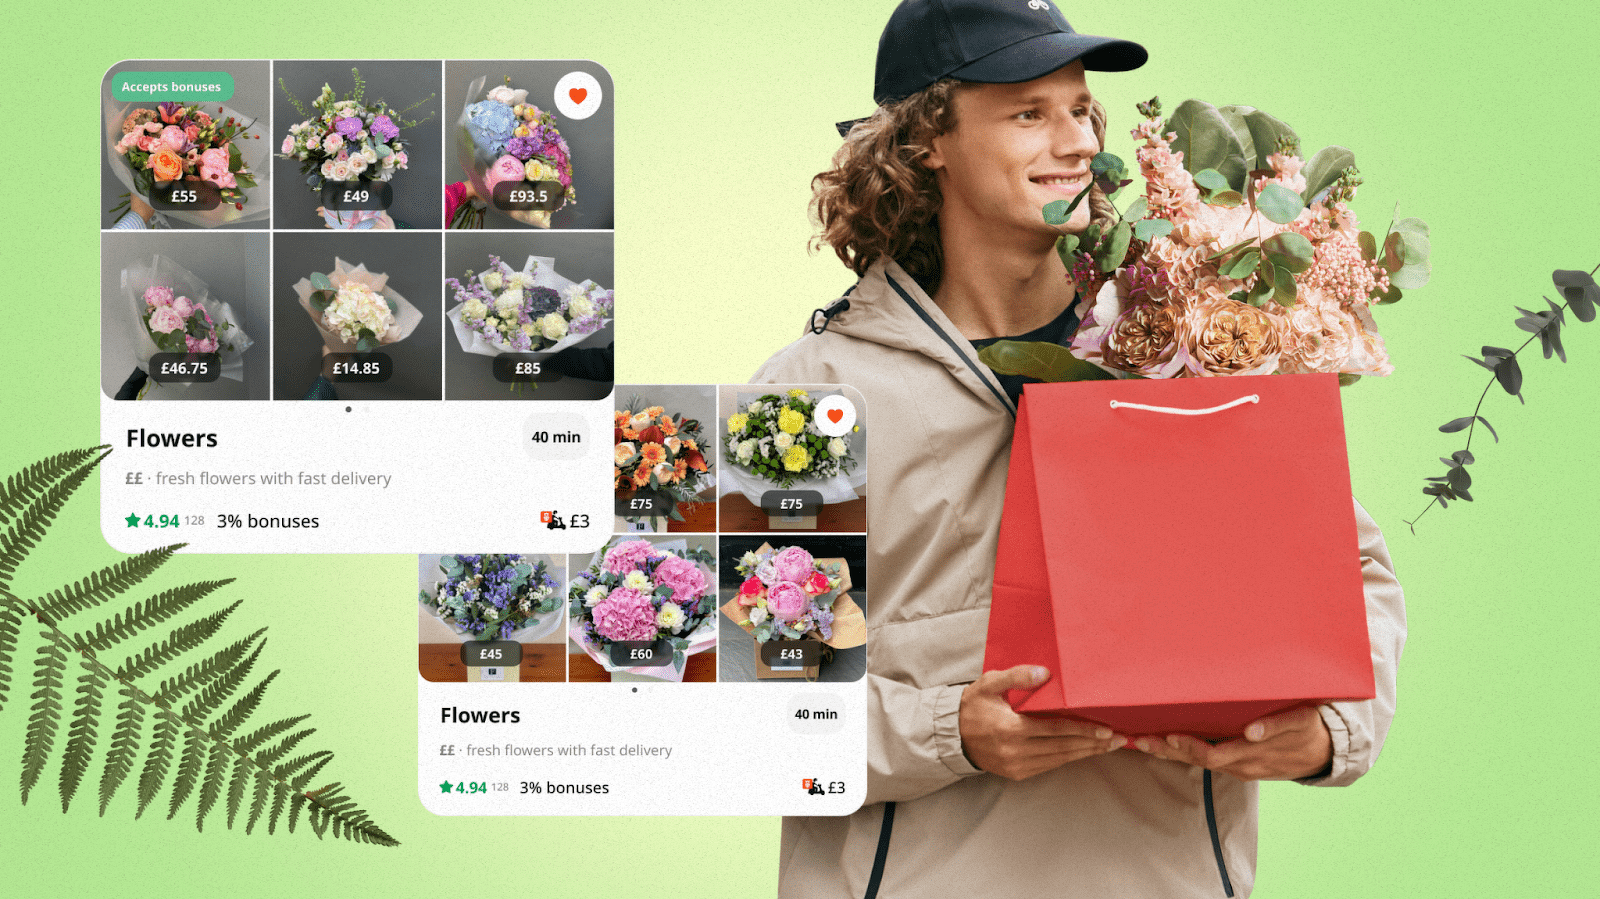 Best Florists with Flower Delivery in London